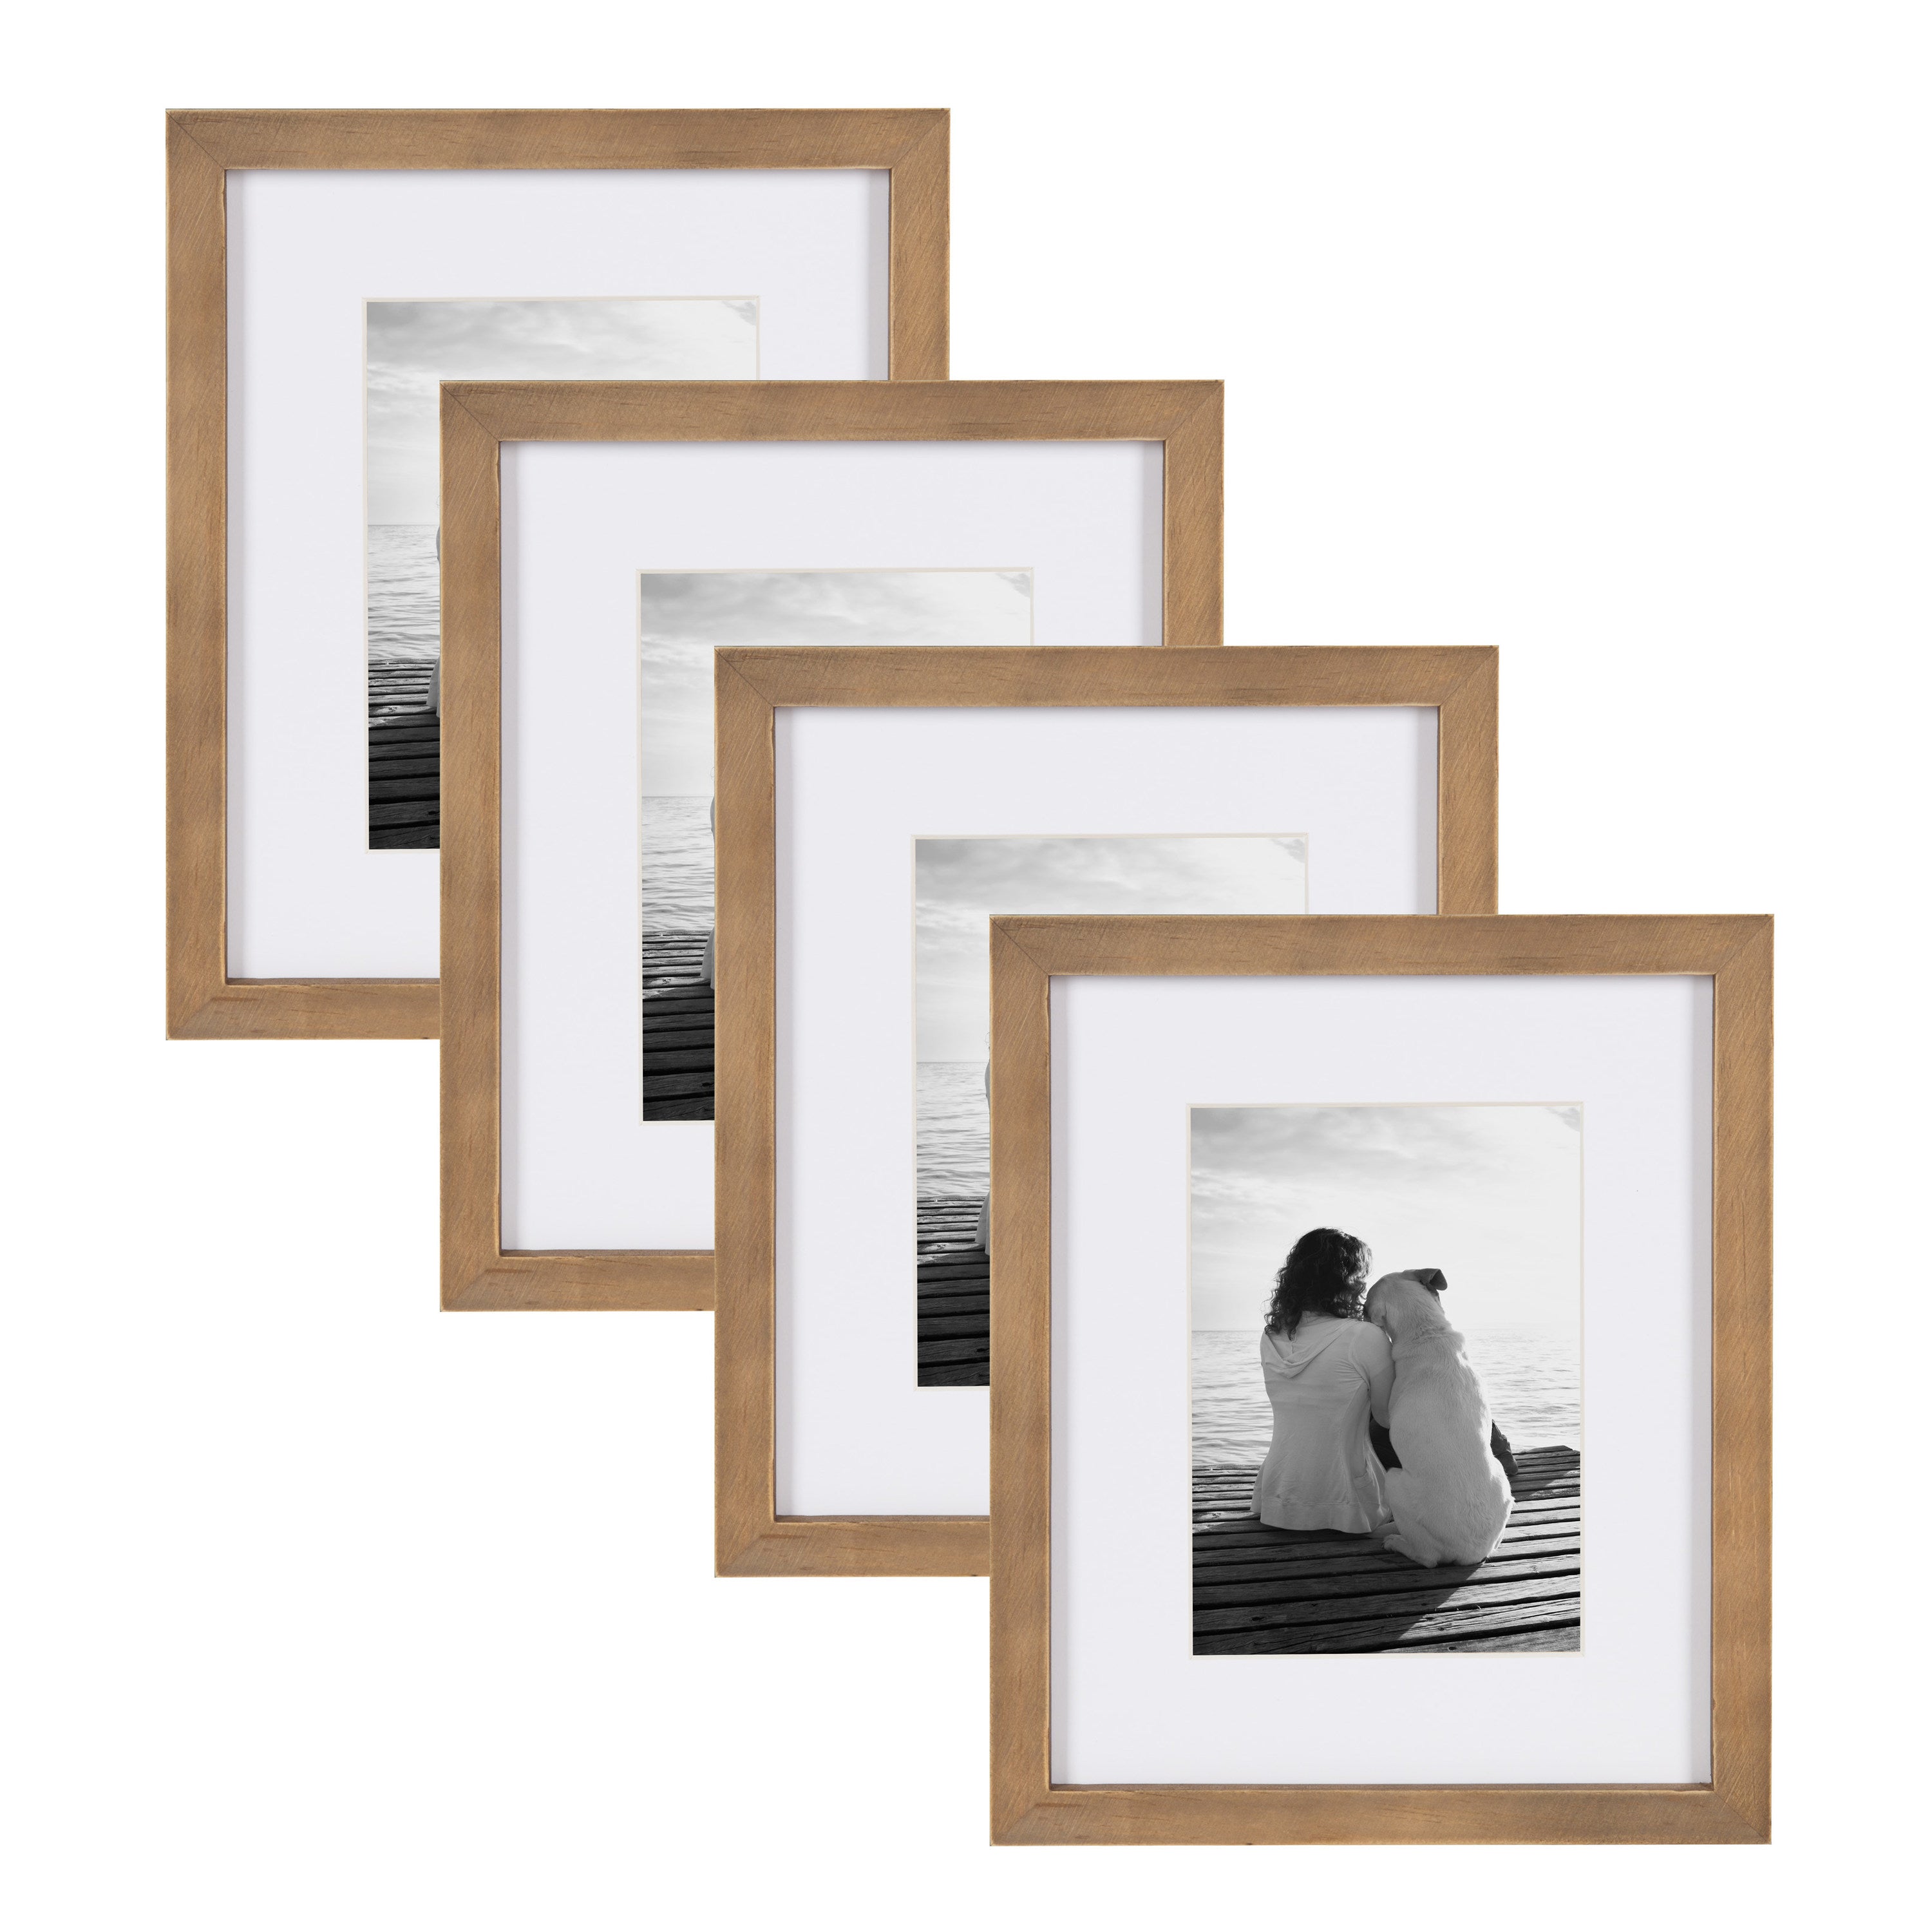 Walnut Wood Wall Frame 8x10 matted to 5x7 by Gallery Solutions™ - Picture  Frames, Photo Albums, Personalized and Engraved Digital Photo Gifts -  SendAFrame